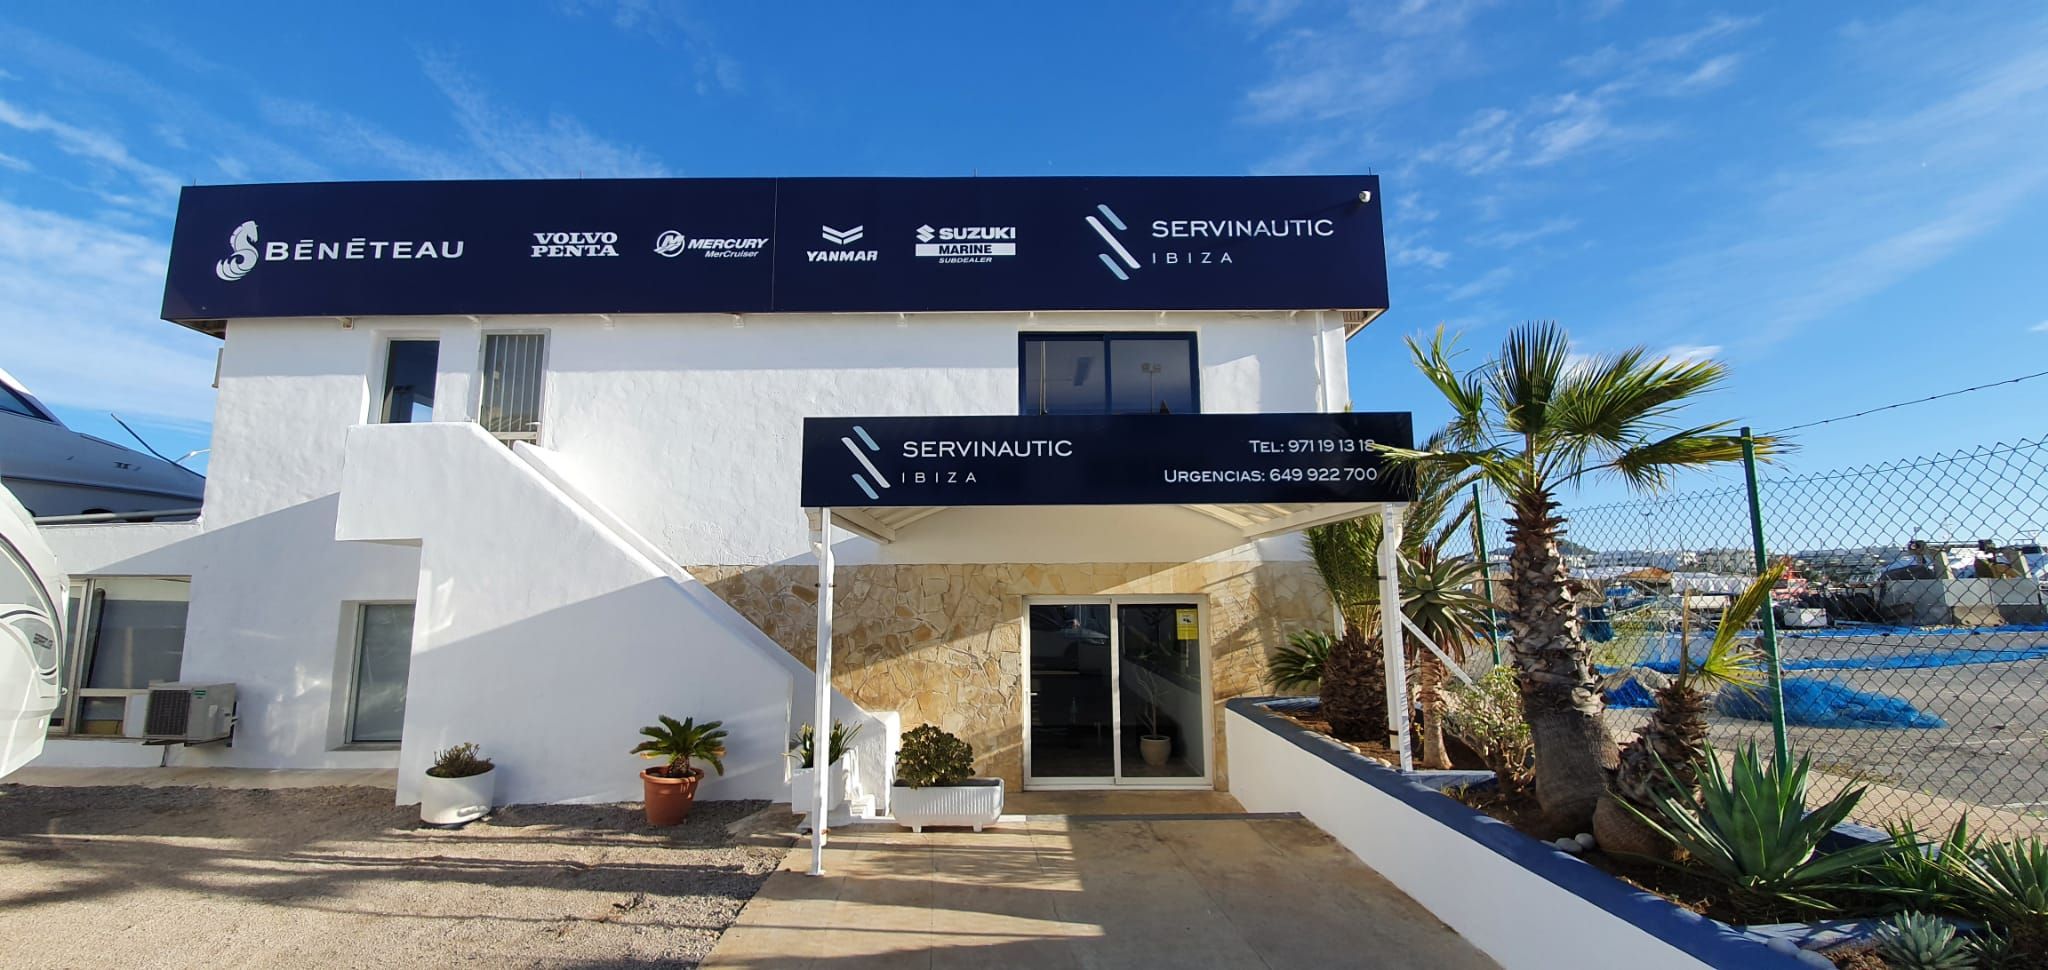 Servinautic Ibiza offices in the Fishing Dock